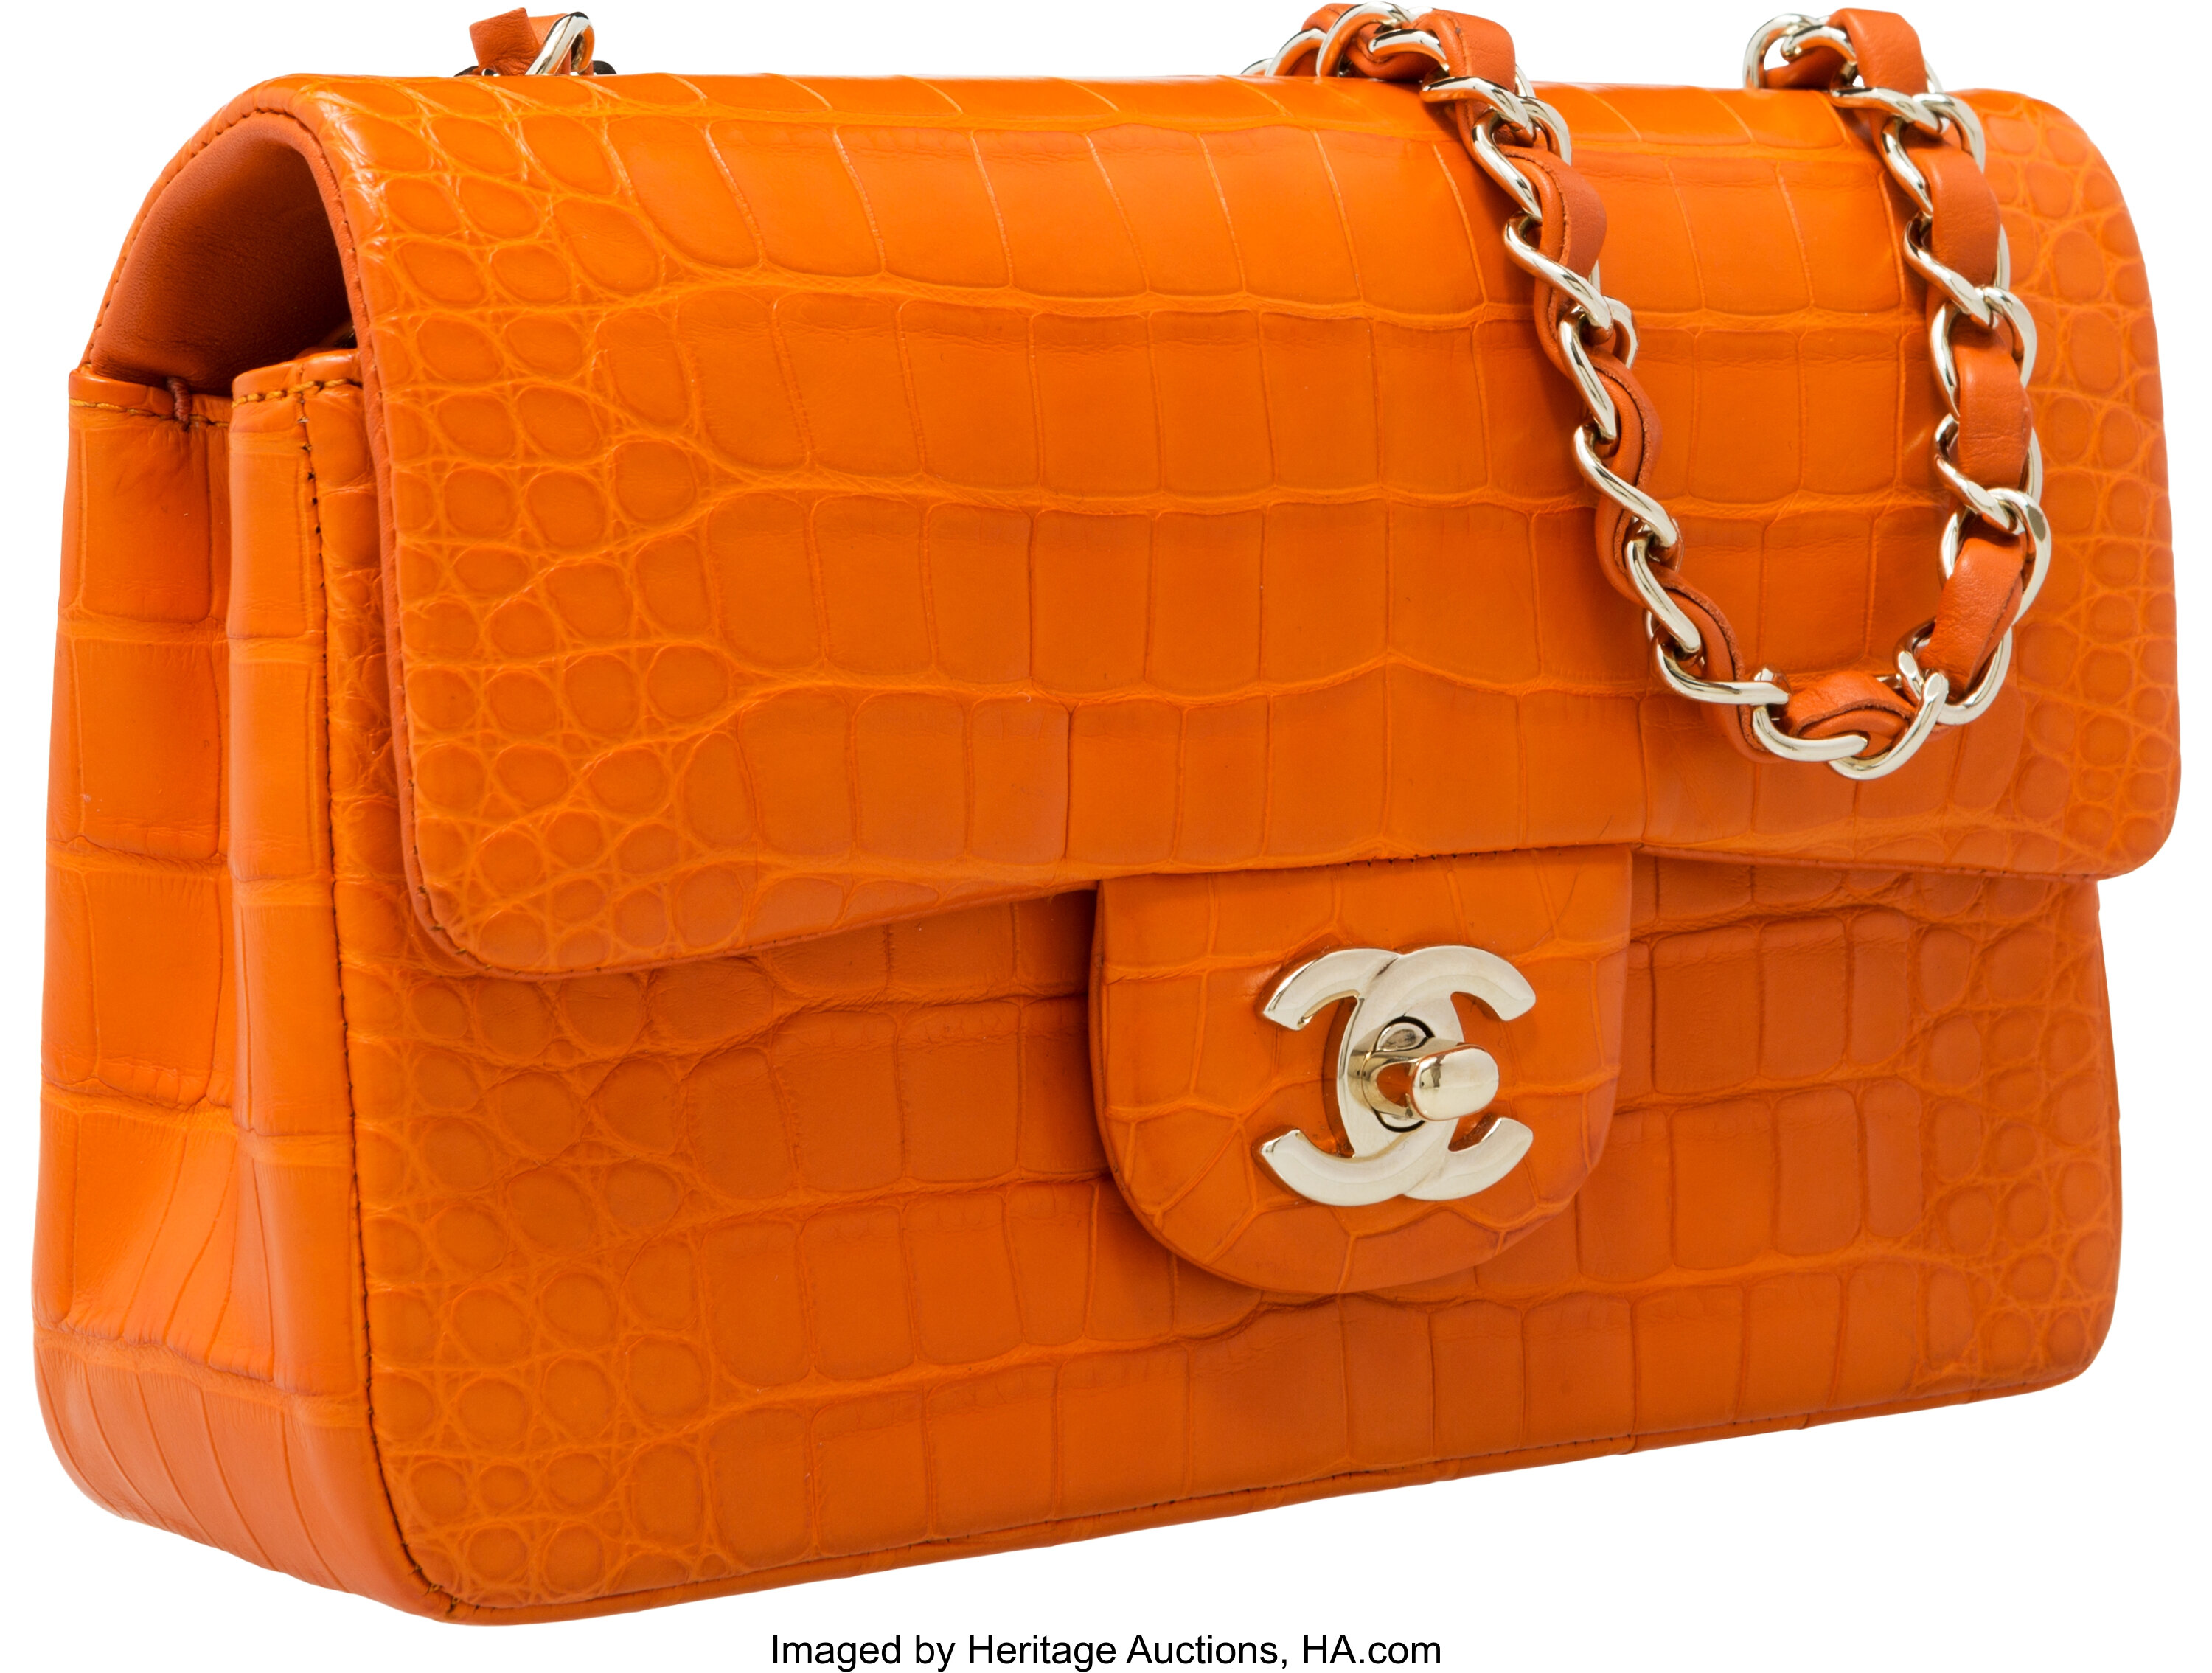 Chanel Matte Orange Crocodile Flap Bag with Gold Hardware. Very | Lot  #58216 | Heritage Auctions